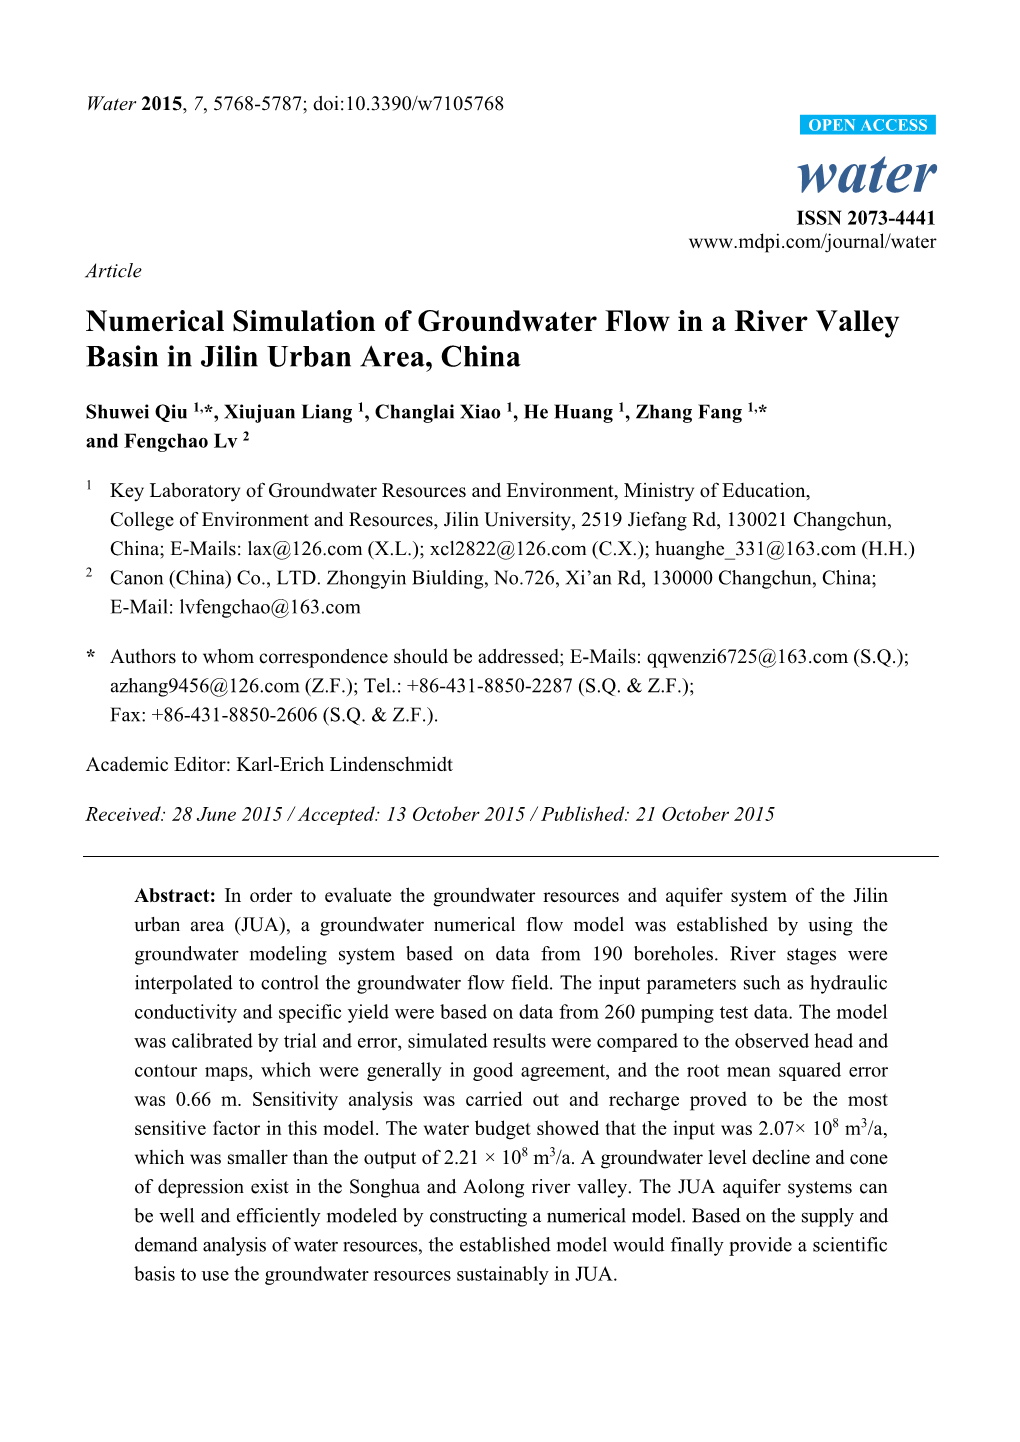 Numerical Simulation of Groundwater Flow in a River Valley Basin in Jilin Urban Area, China